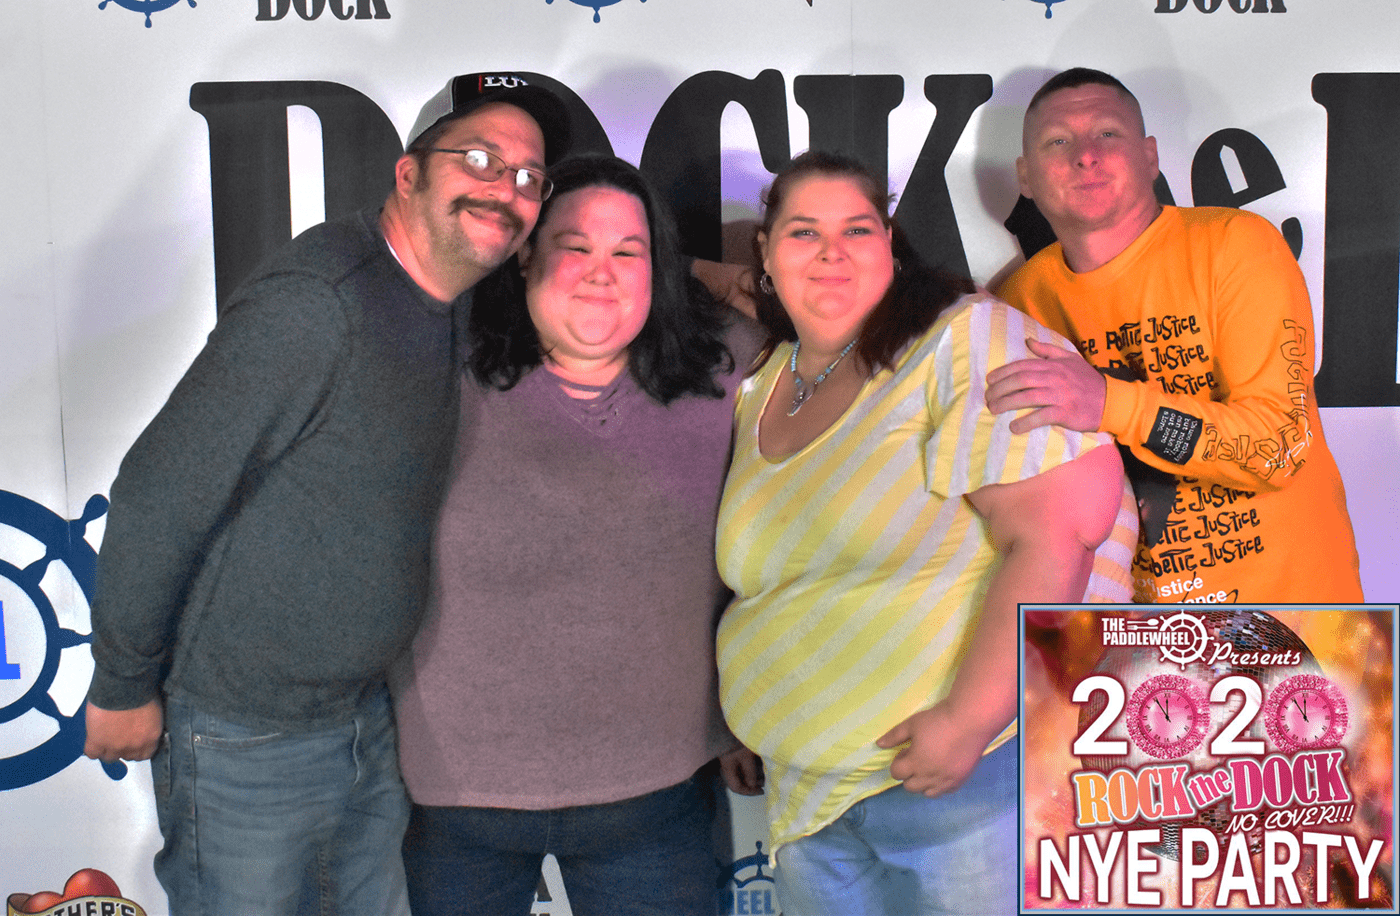 The Photobooth Pictures from New Year's Eve 2020